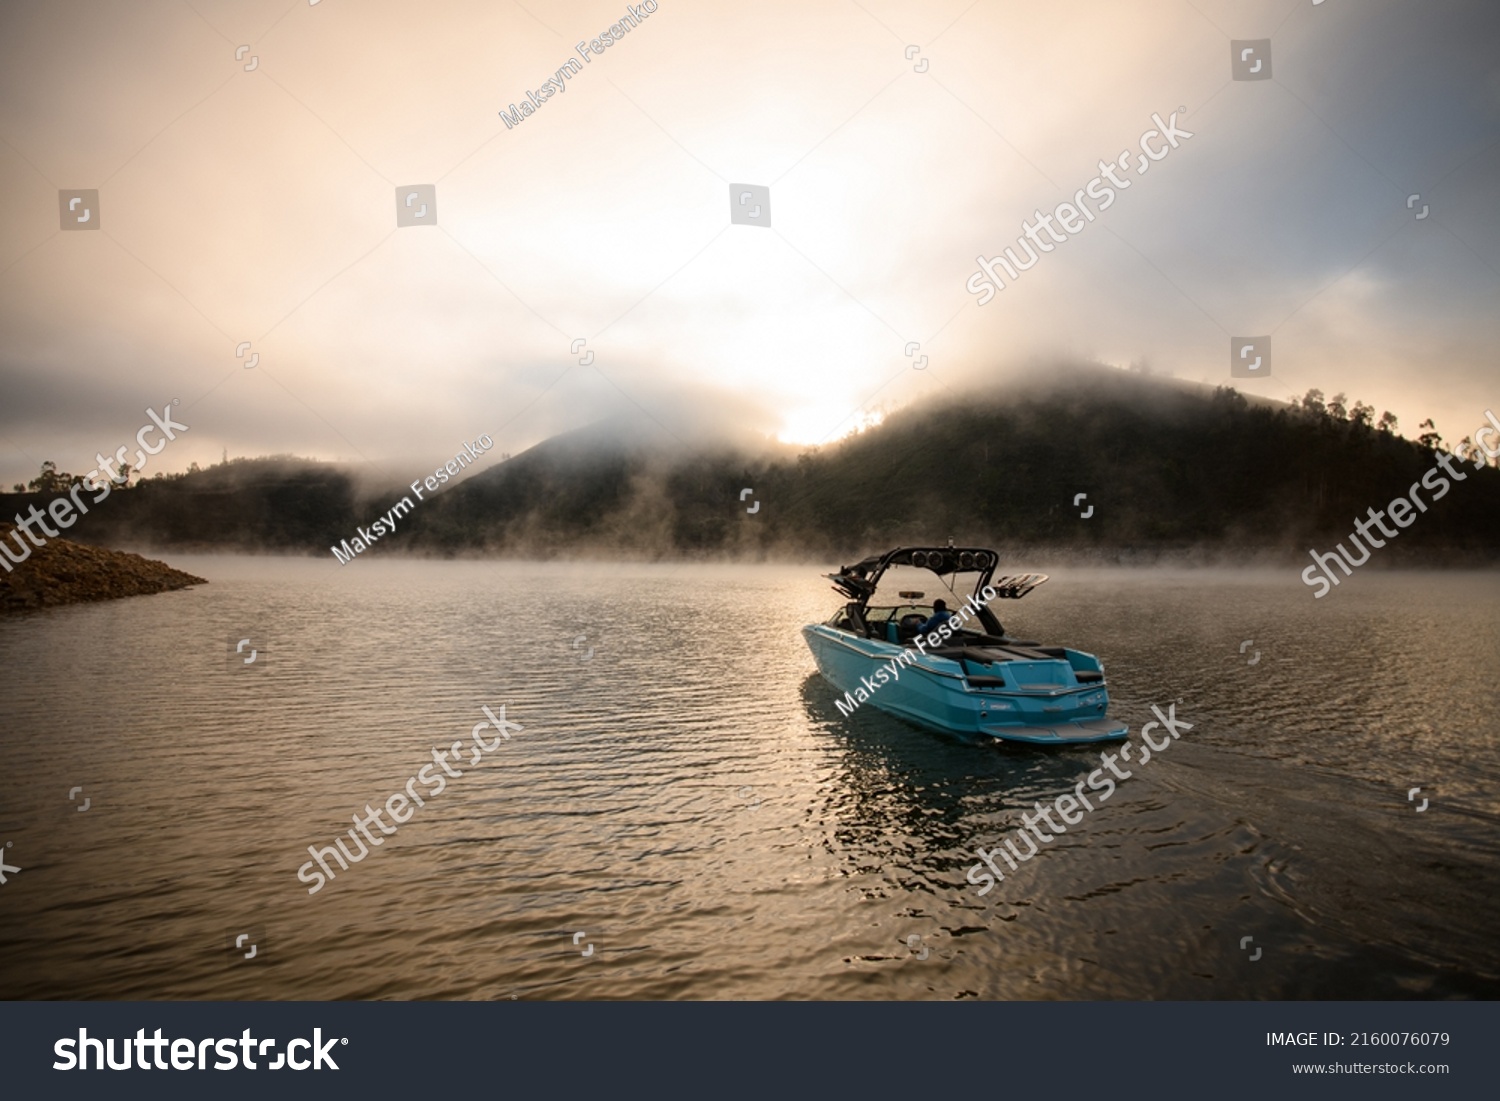 Great view on bright blue modern motor boat floating on water. Scenic view of hills and sky with cumulus clouds on the background #2160076079